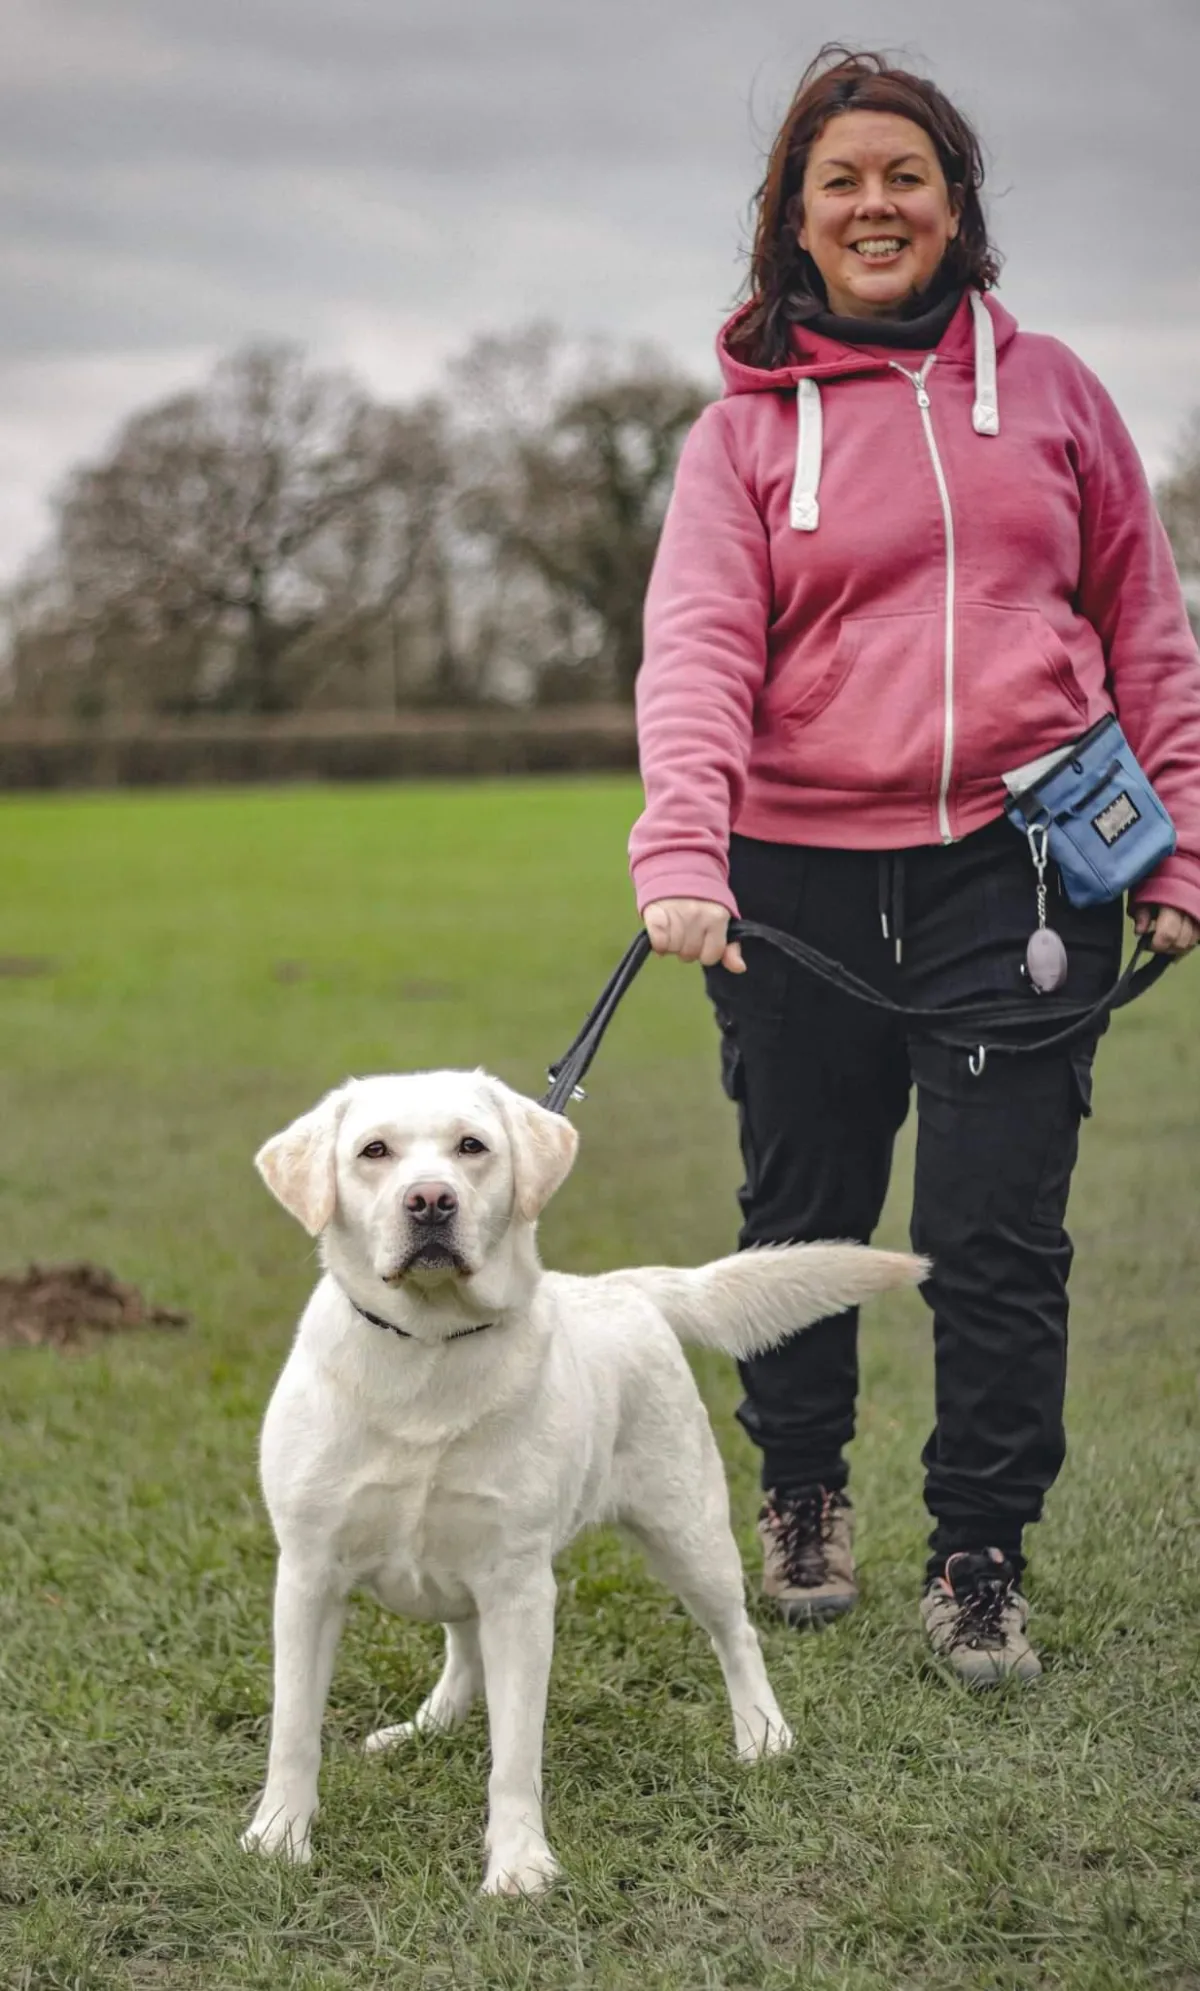 Sam Head Trainer with a labrador dog t the training facility in Claybrooke